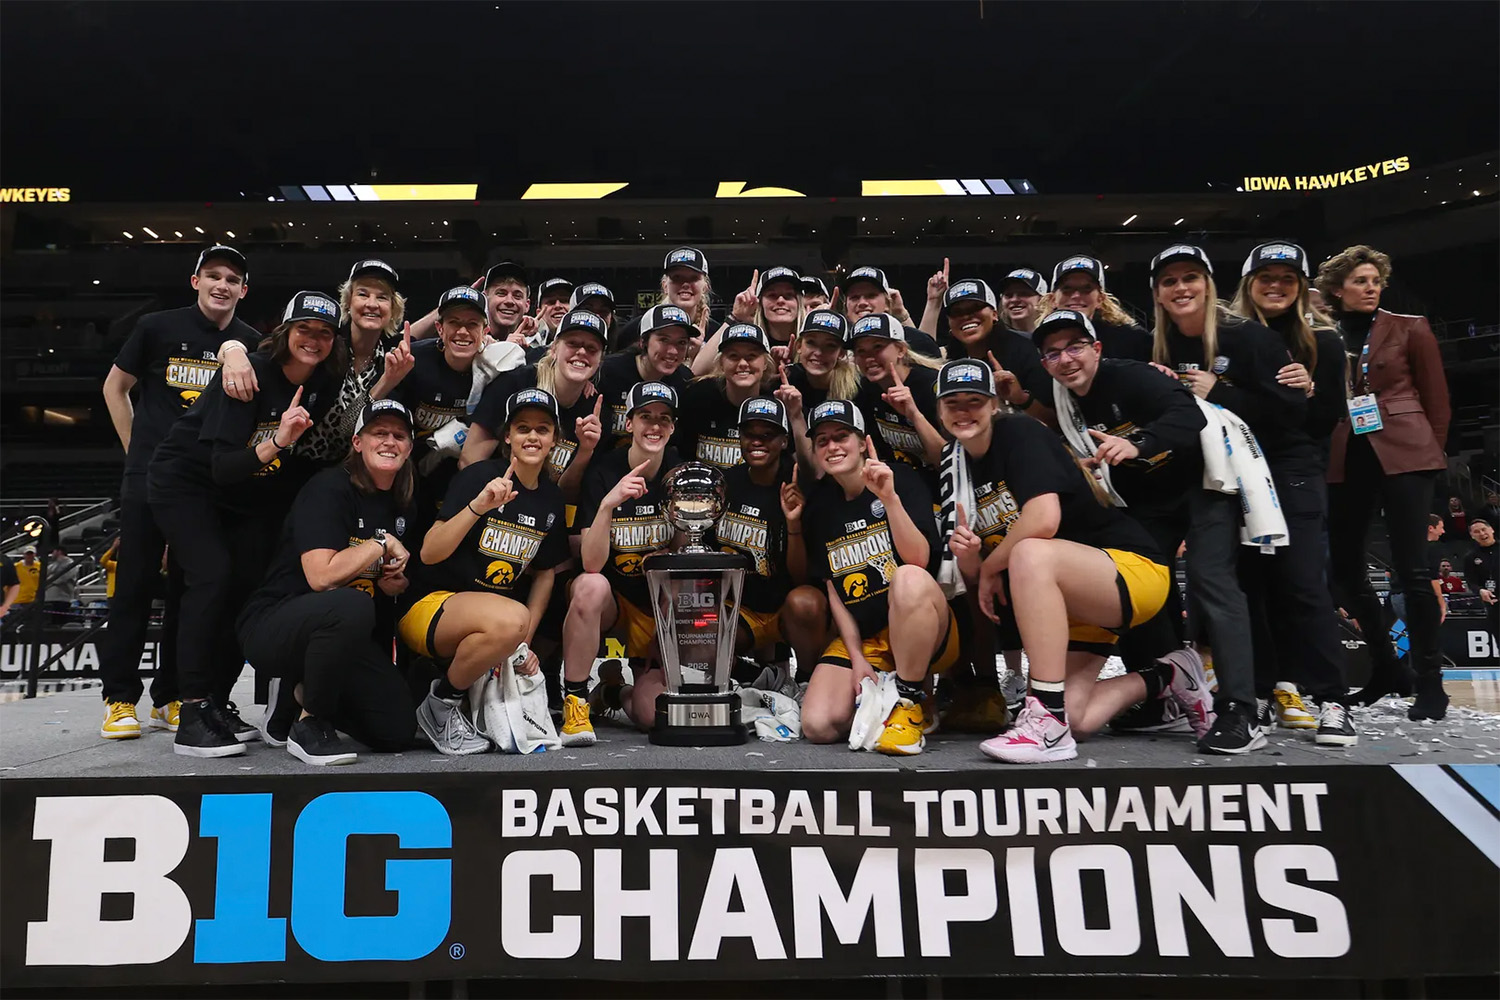 university of iowa women's basketball team posing for a team photo after winning the big ten conference basketball tournament